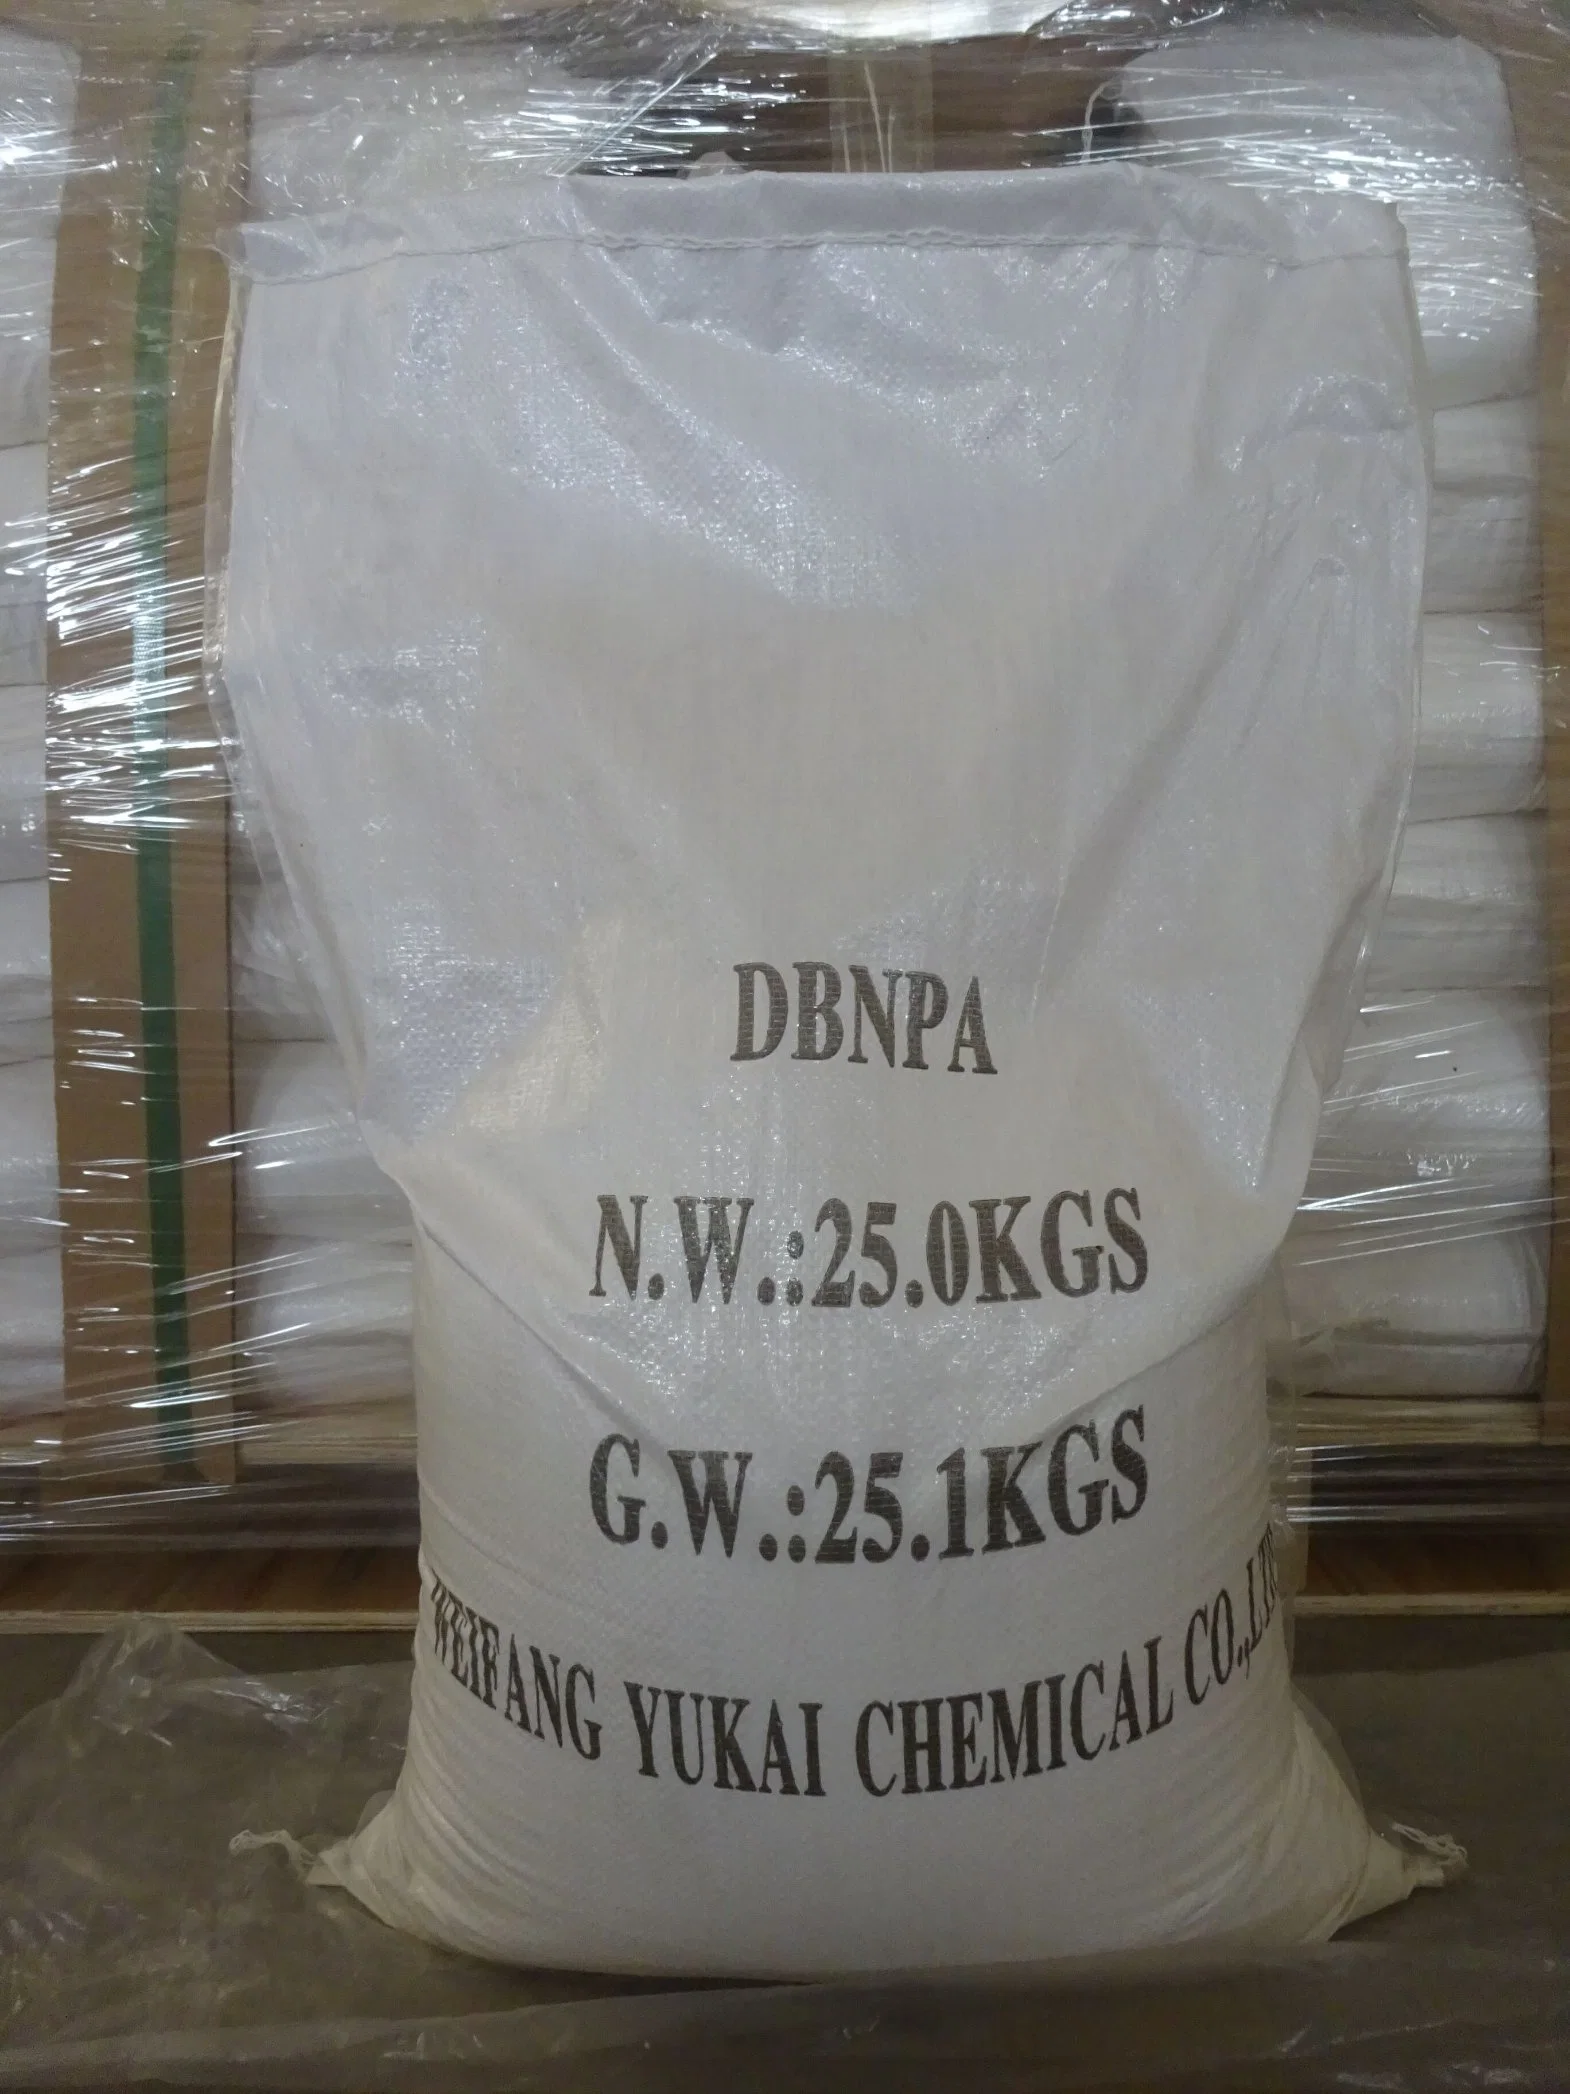 2 2-Dibromo-2-Cyanoacetamide High quality/High cost performance Preservative and Biocide Raw Material Dbnpa